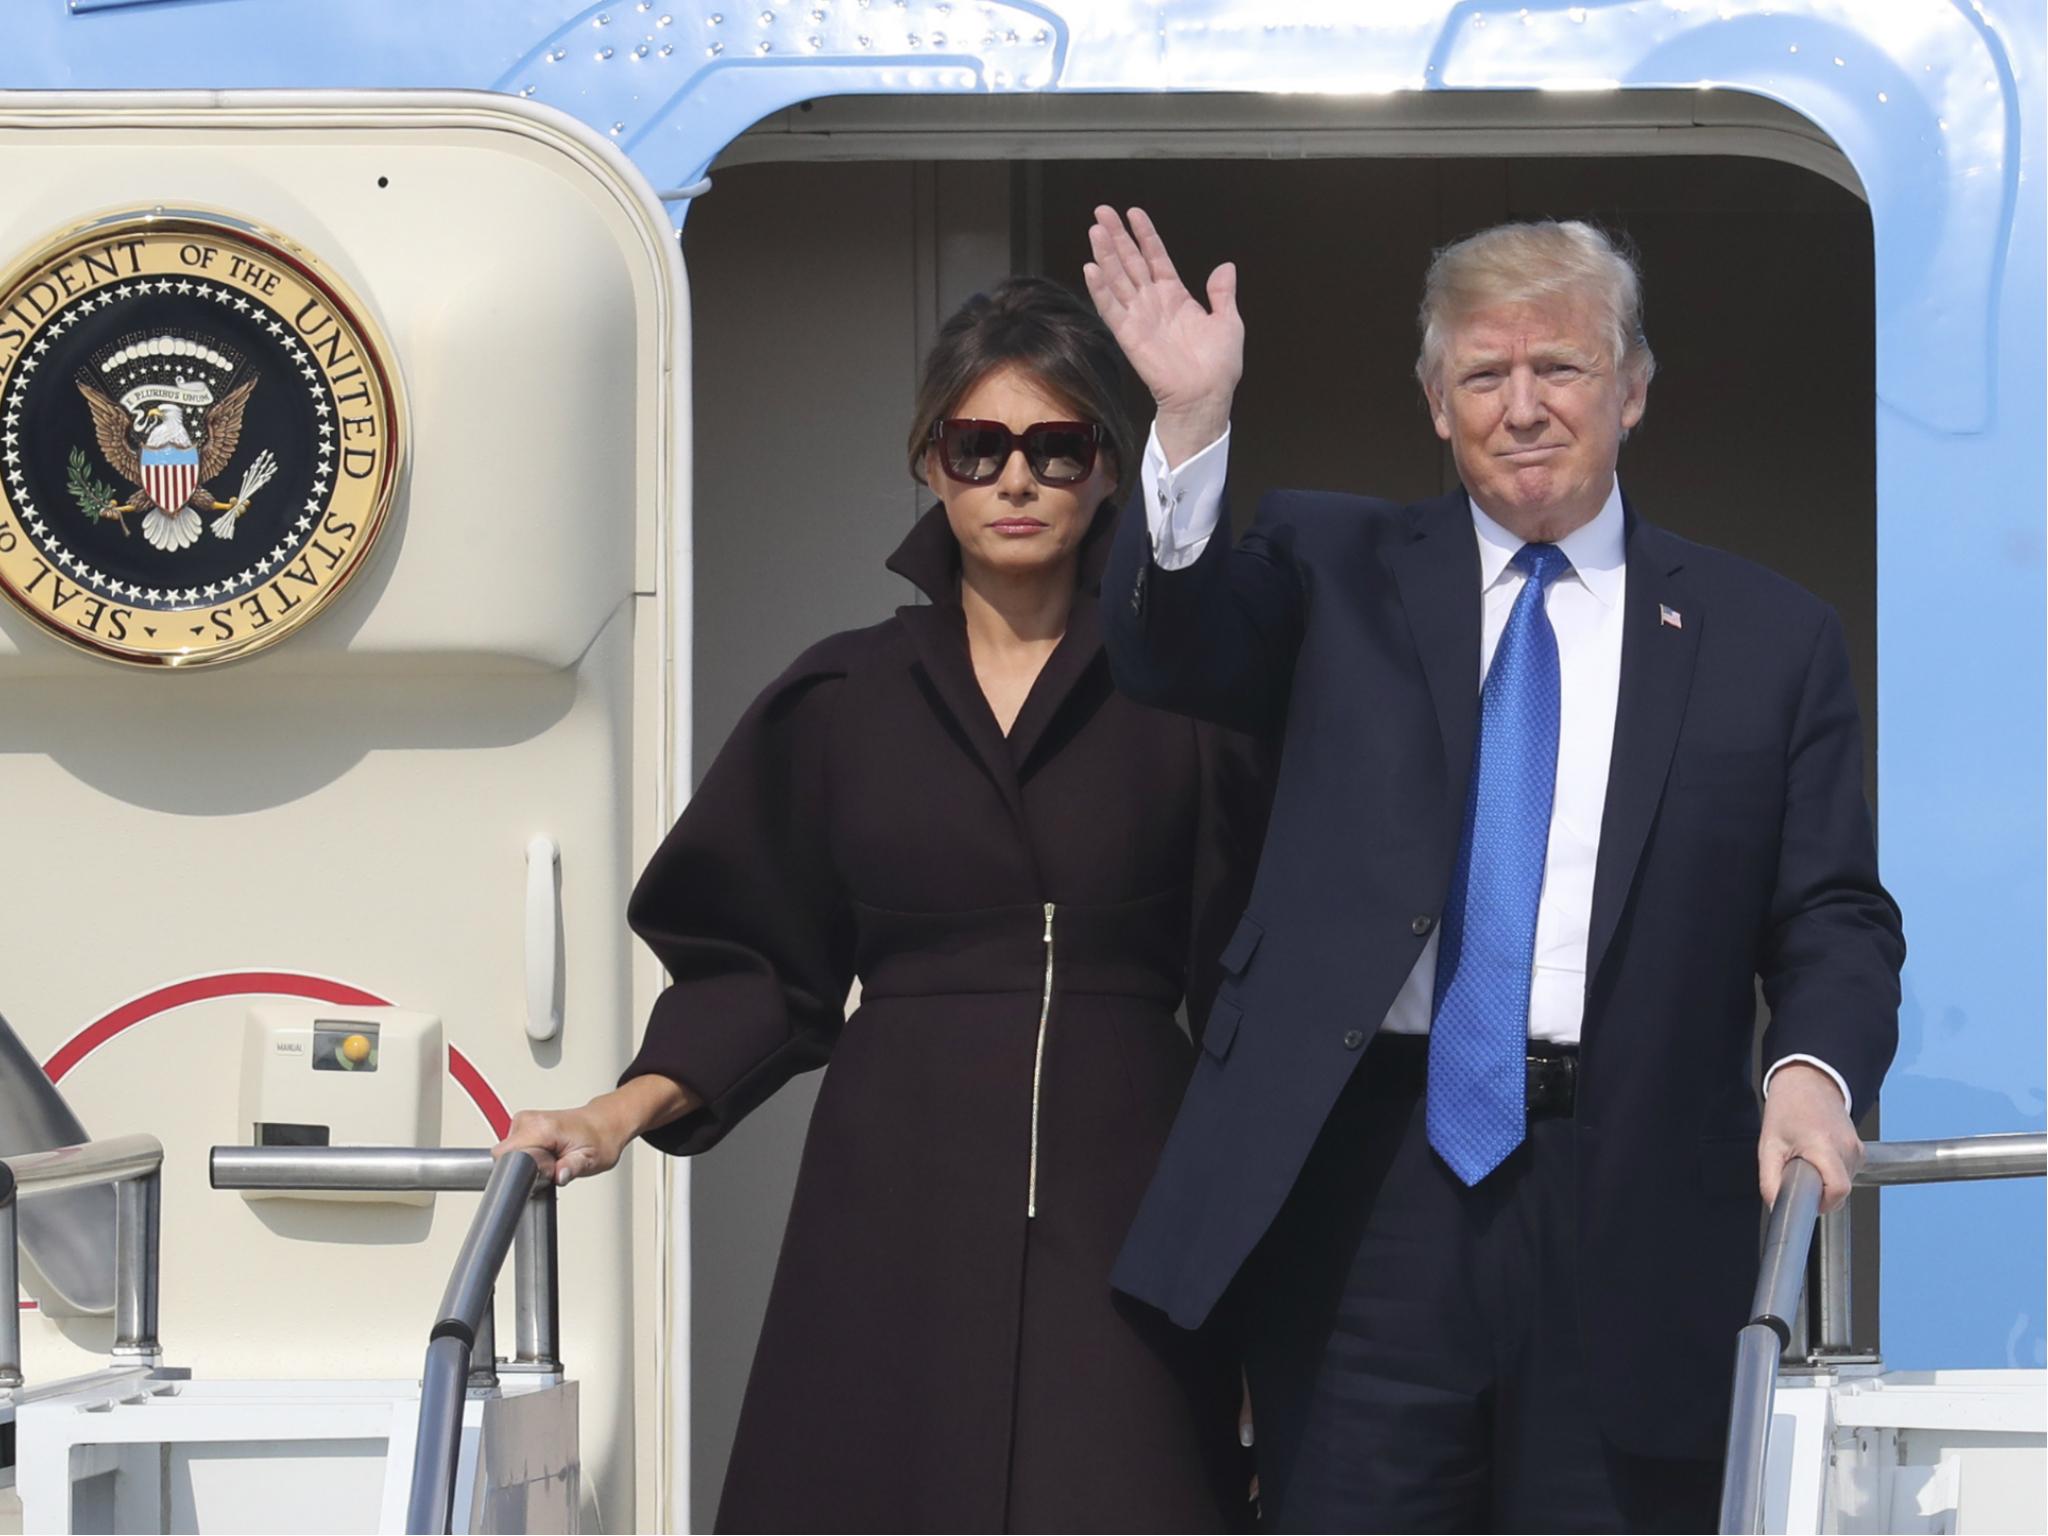 Mr Trump is stopping in China as a part of his first trip as President to Asia